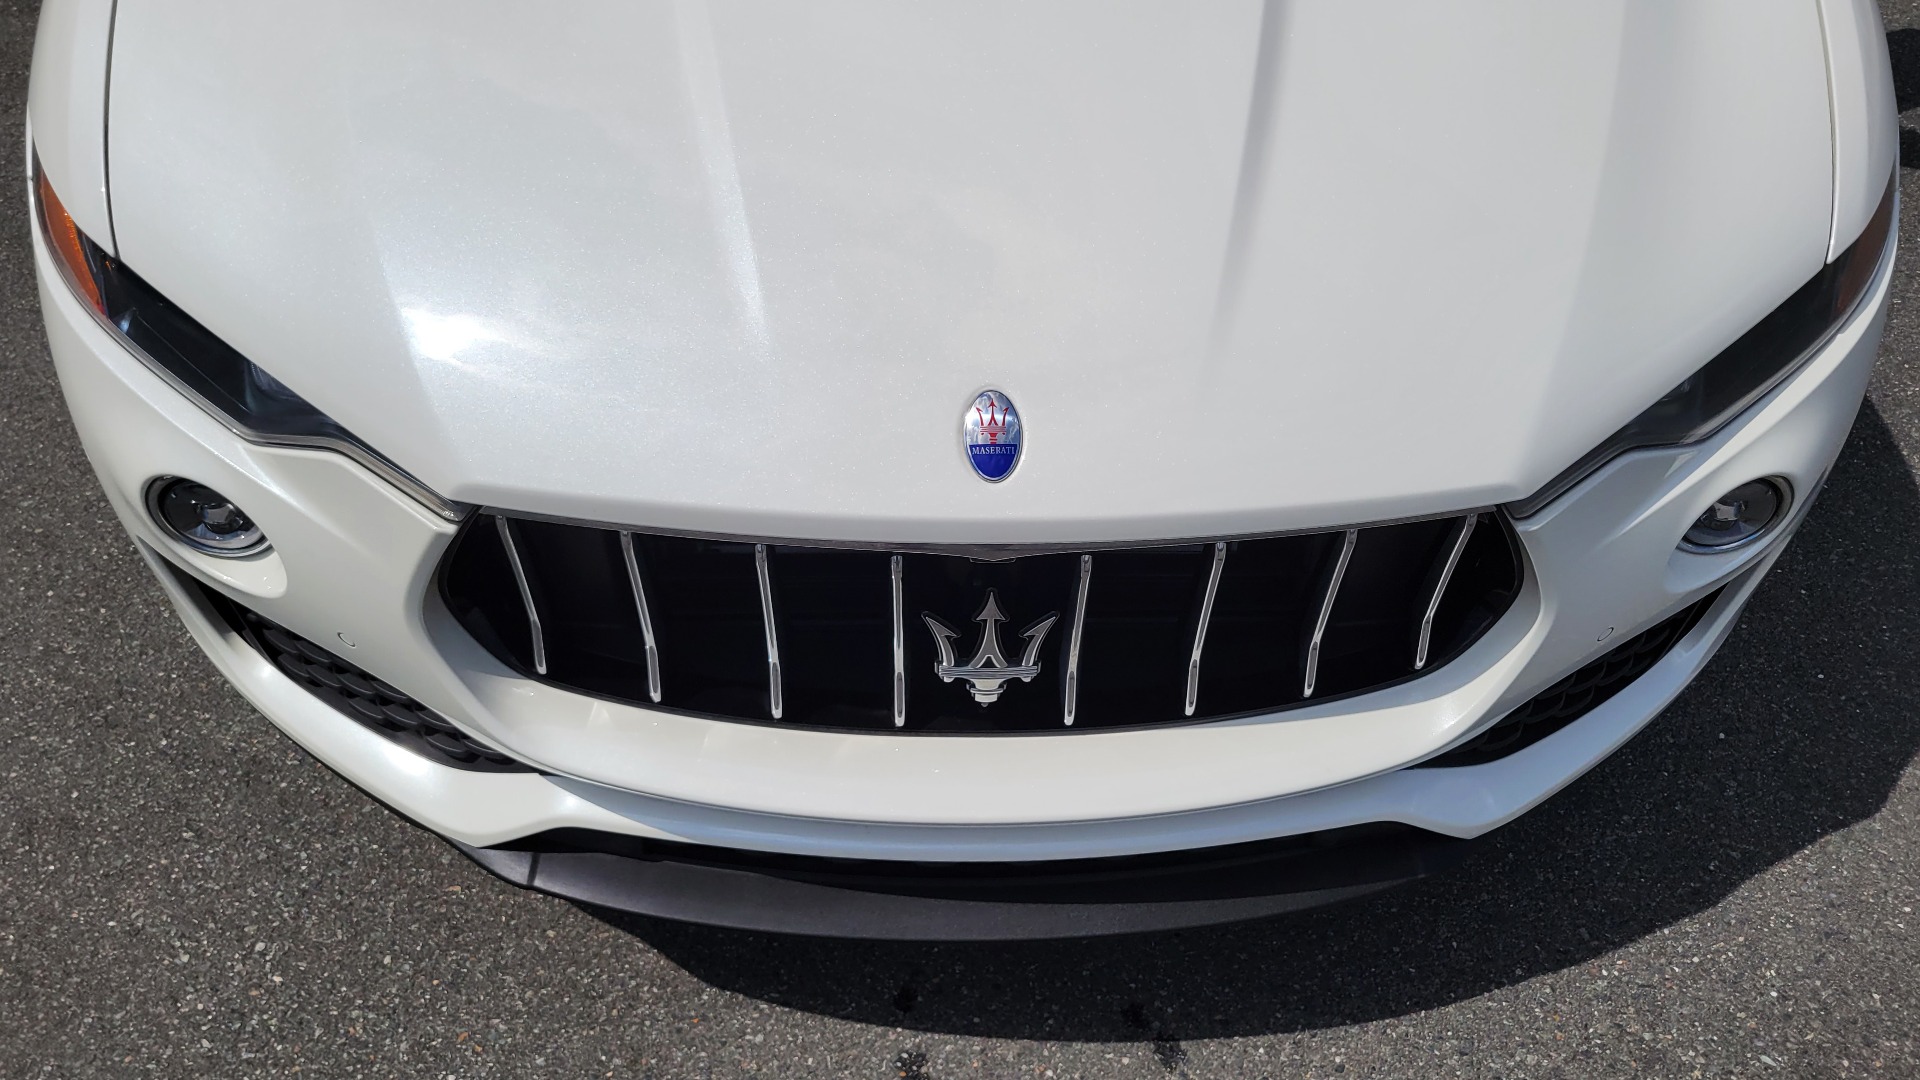 Used 2018 Maserati LEVANTE 3.0L 345HP SUV / 8-SPD / PREMIUM / BSA / NAV / 20IN WHLS / REARVIEW for sale $50,495 at Formula Imports in Charlotte NC 28227 31